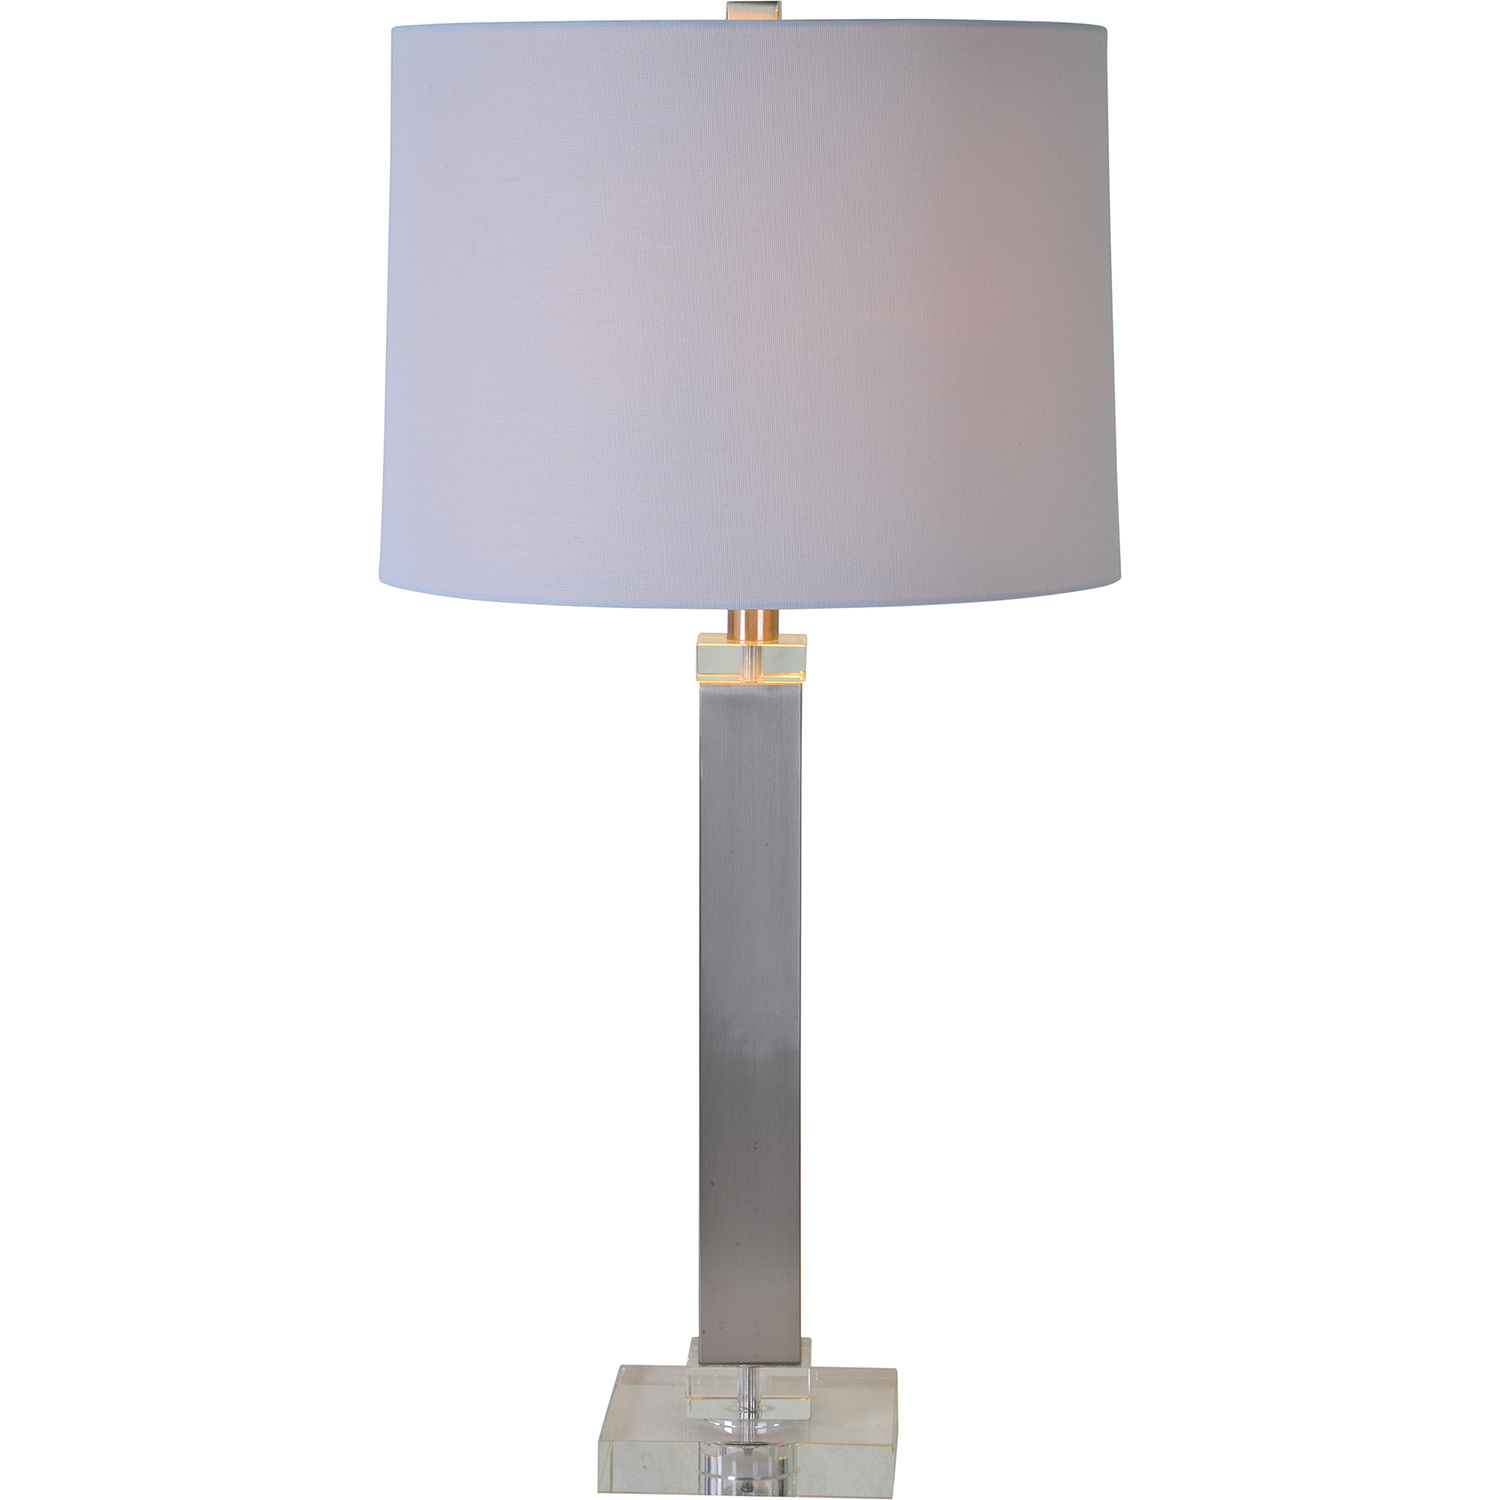 Ren-Wil Sauline Table Lamp - Clear